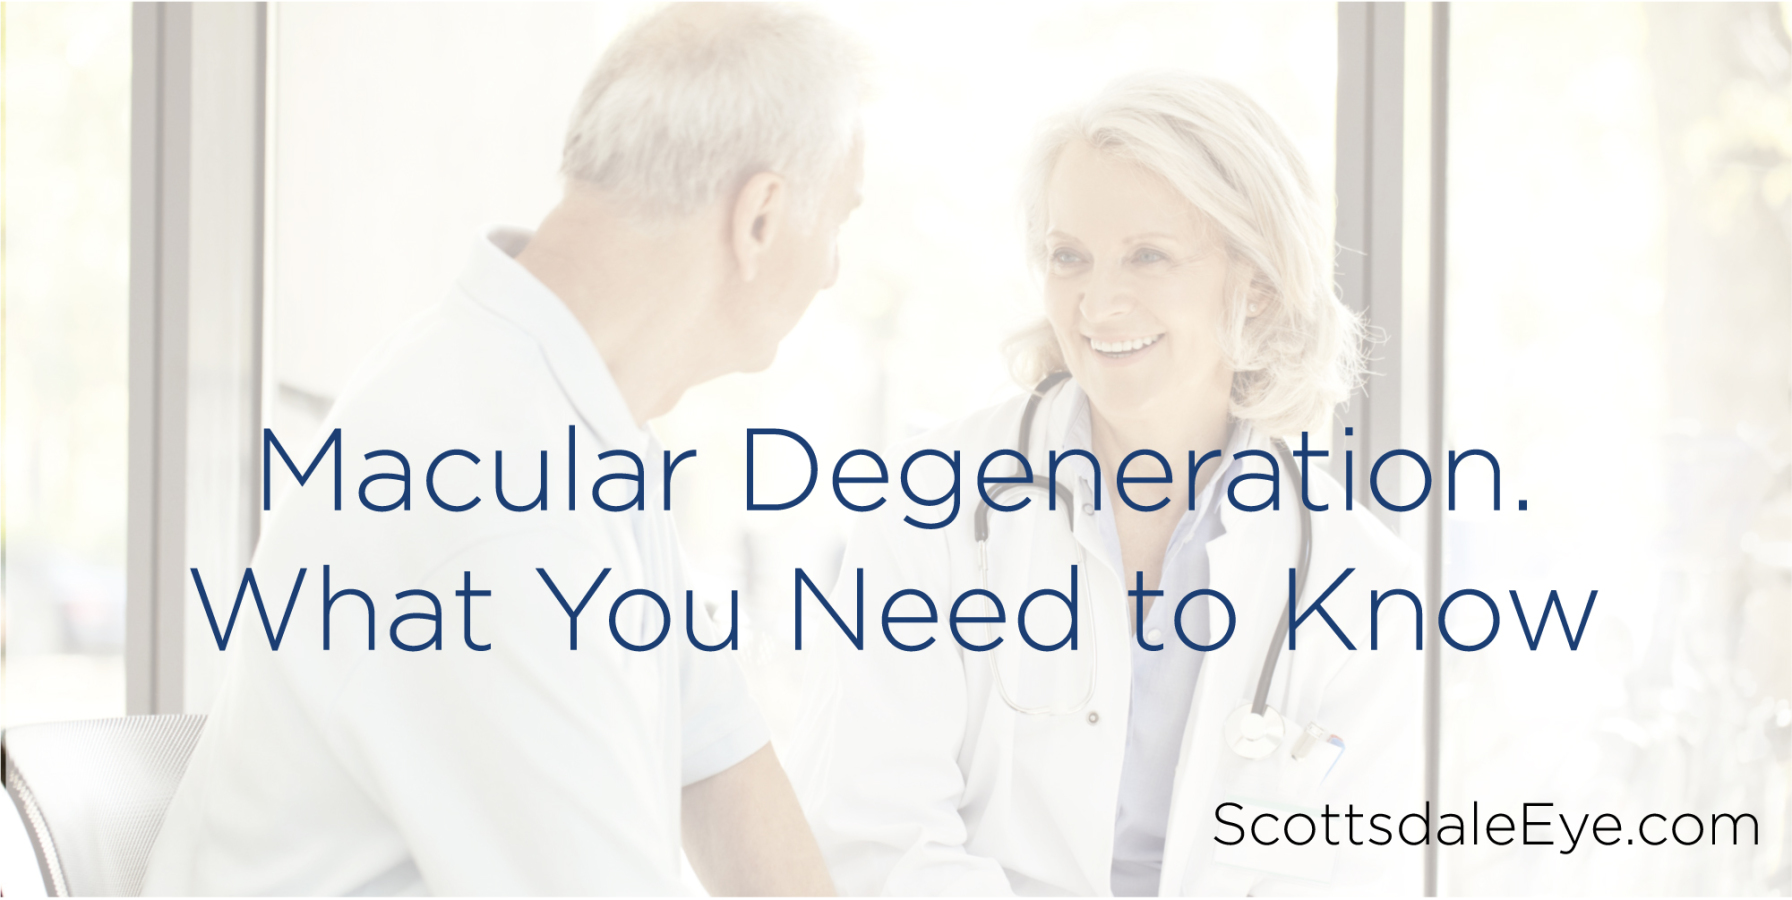 Macular Degeneration. What You Need to Know